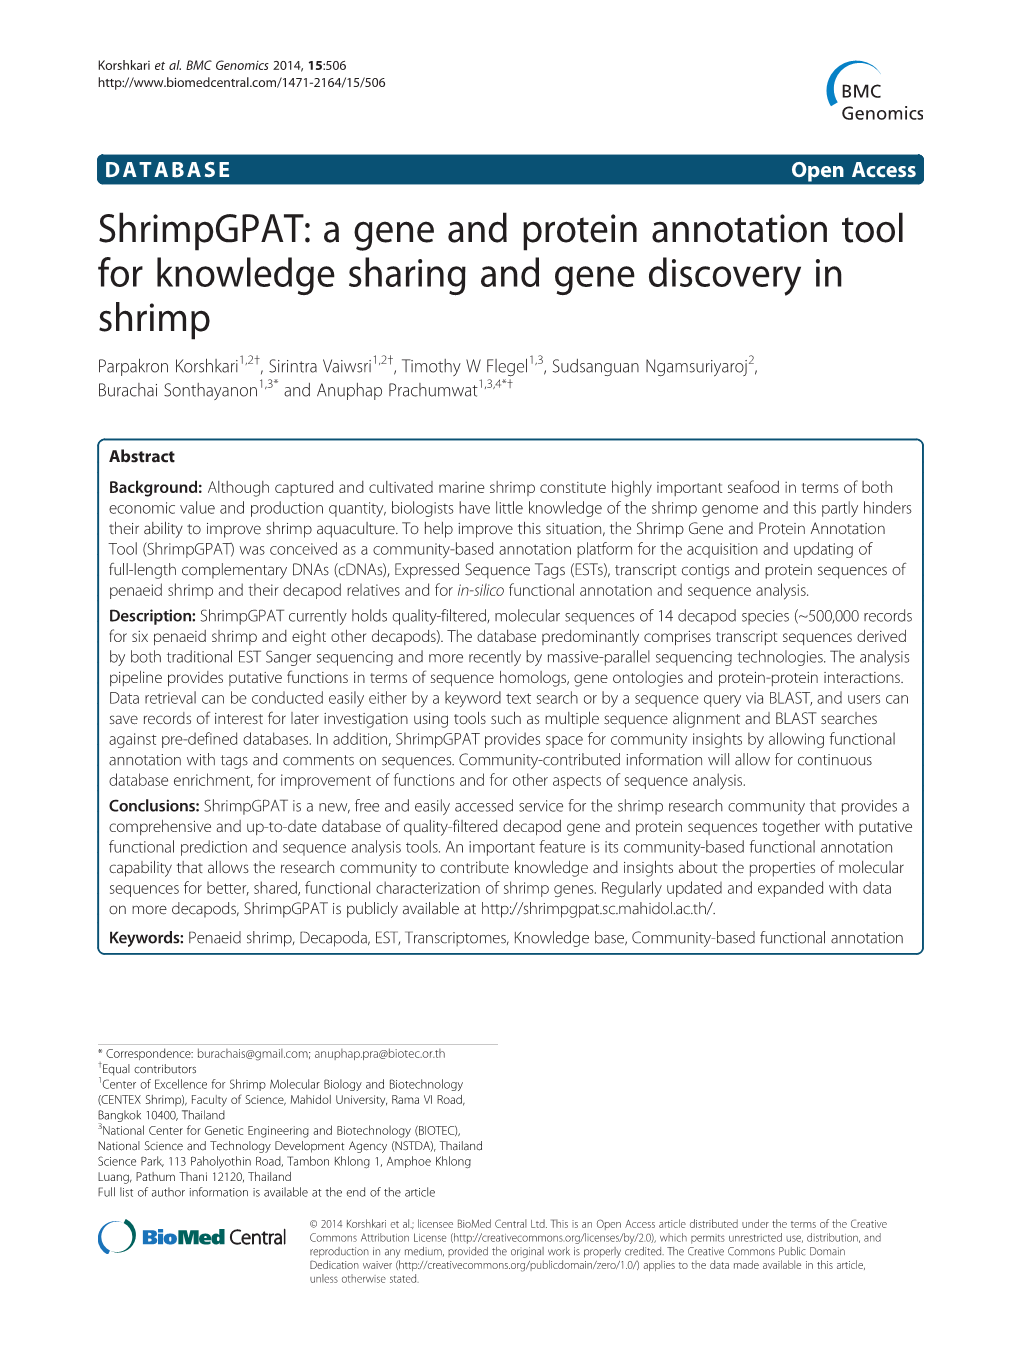 A Gene and Protein Annotation Tool for Knowledge Sharing and Gene